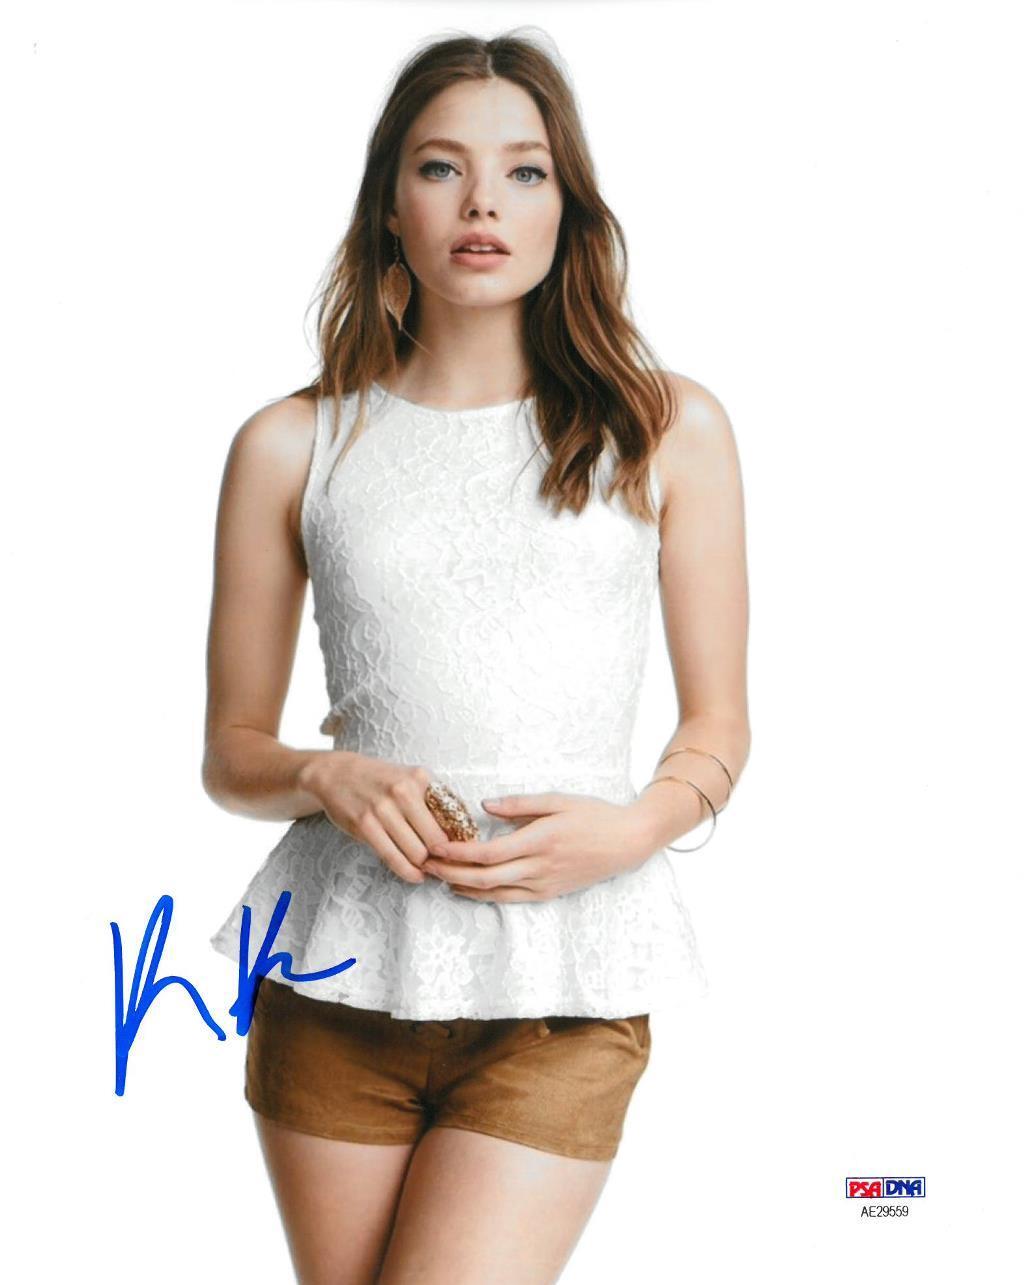 Kristine Froseth Signed Authentic Autographed 8x10 Photo Poster painting PSA/DNA #AE29559